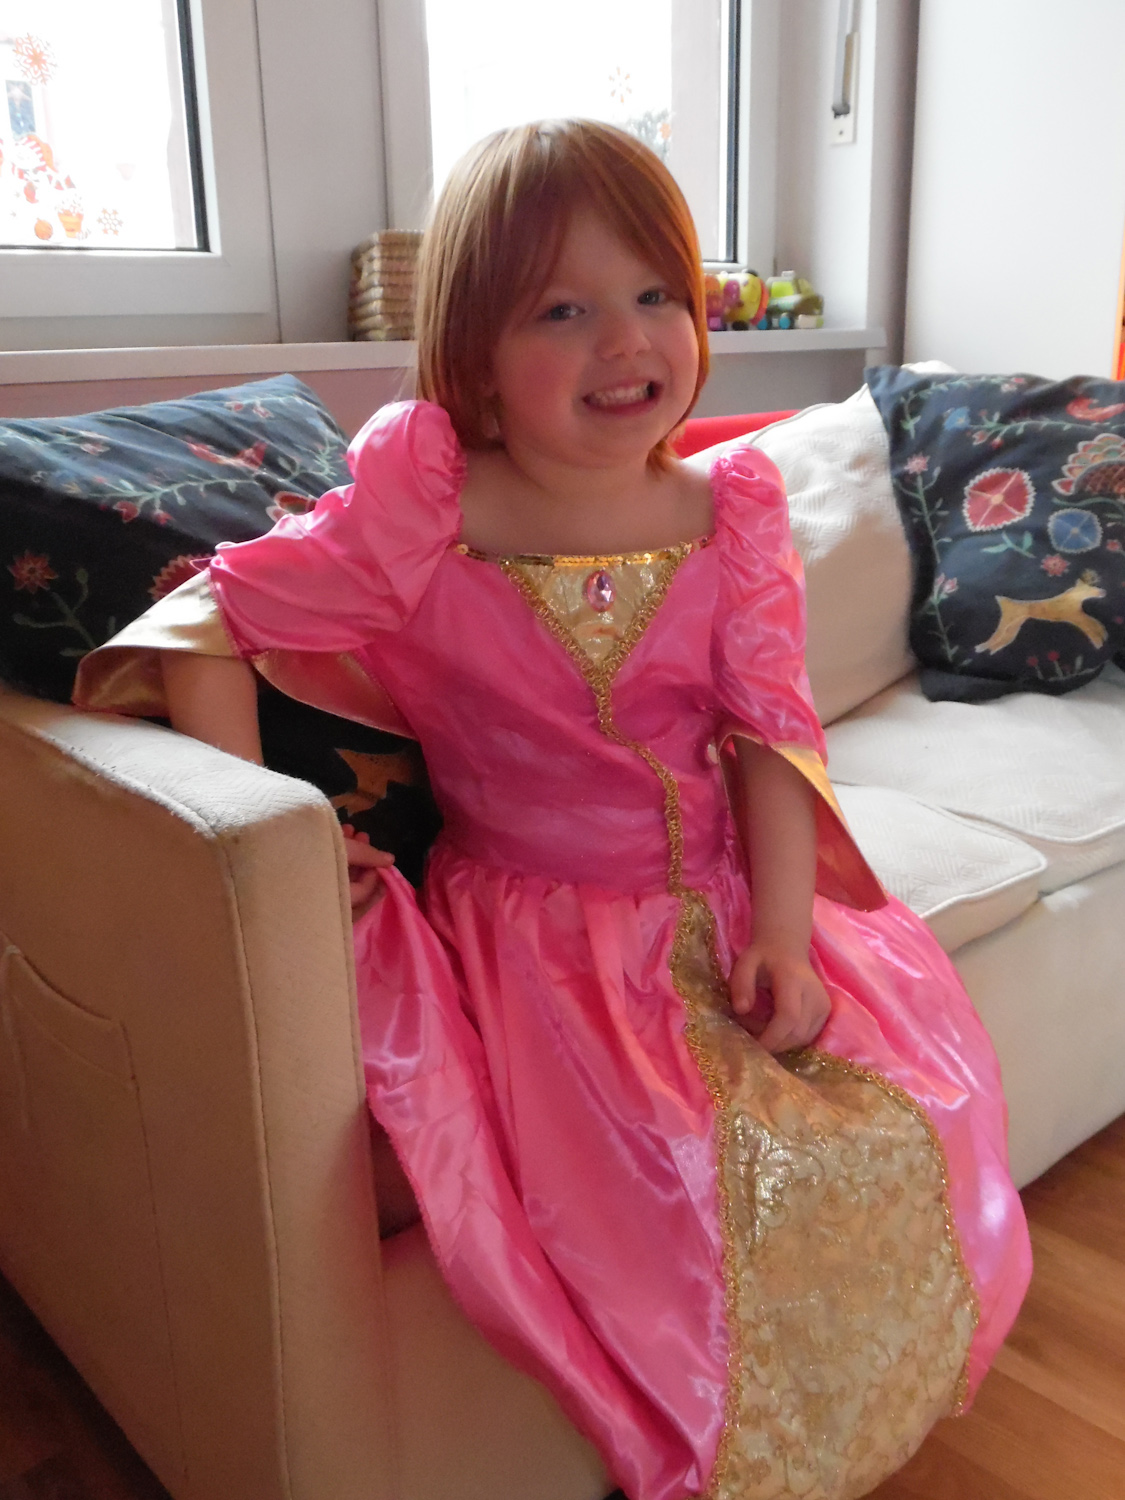 the newest princess dress, from Tia